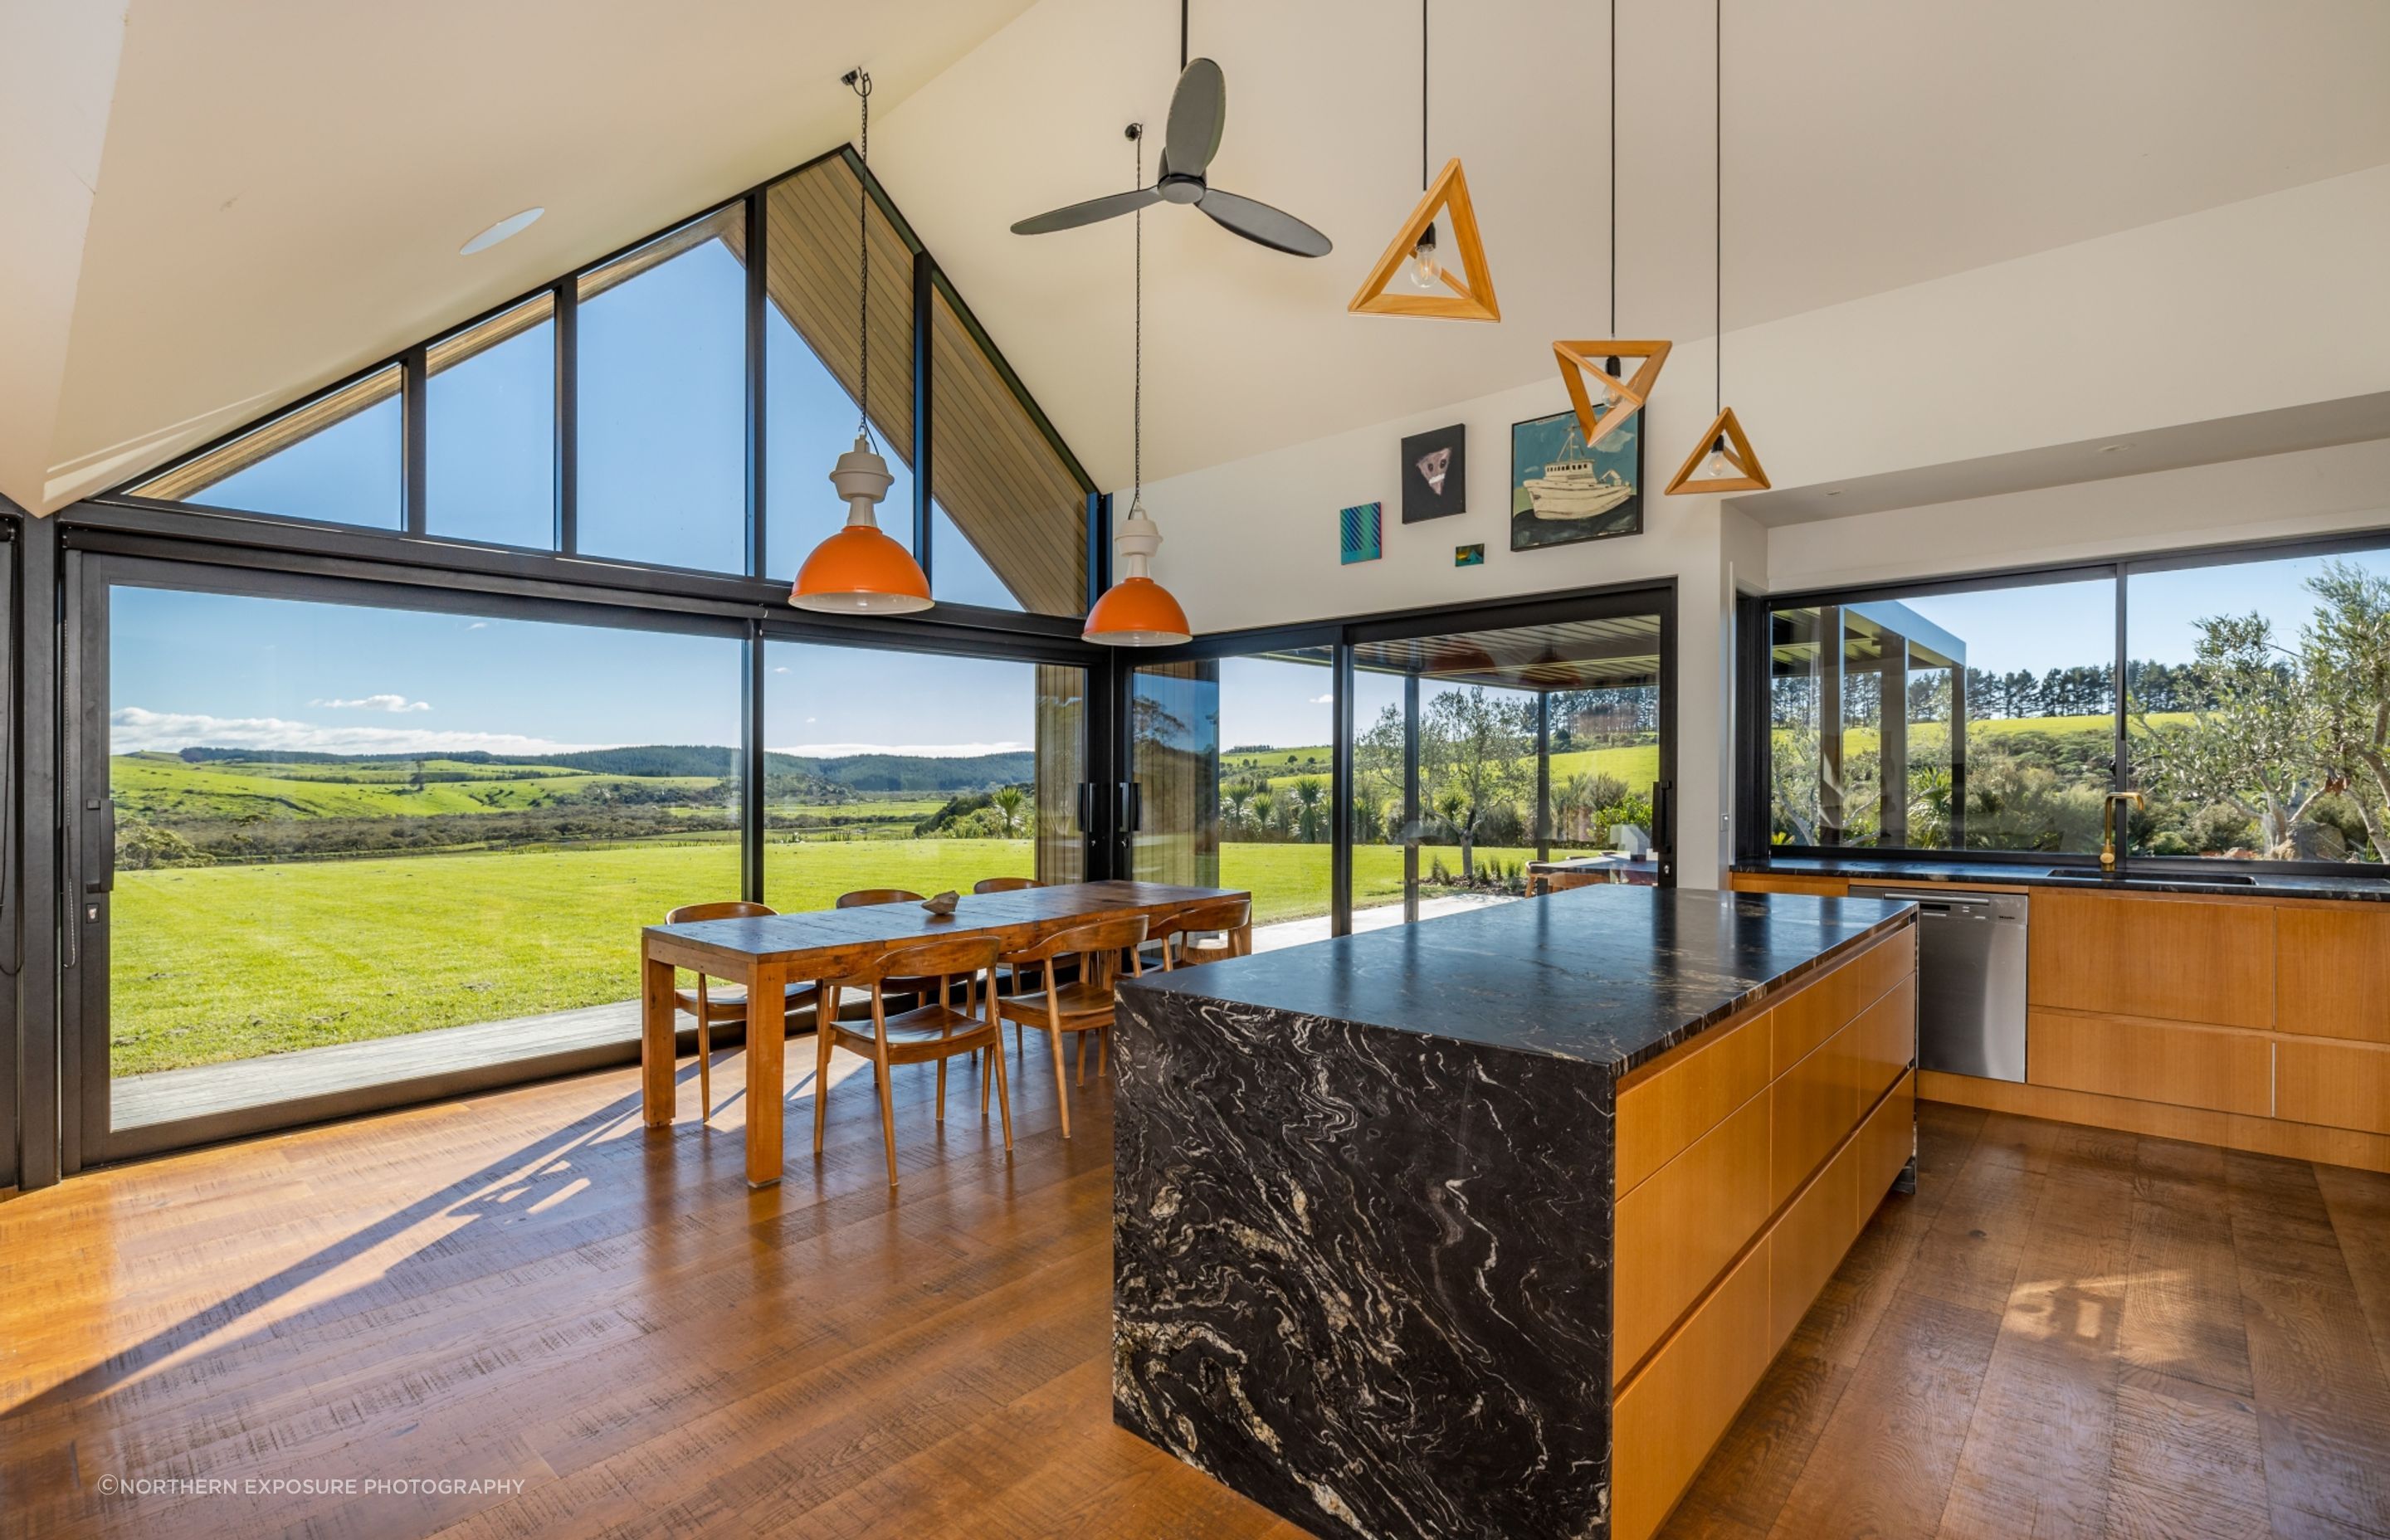 The vaulted ceiling forms and floor-to-ceiling glazing ensure attention is firmly on the view and the connection to the outdoors.